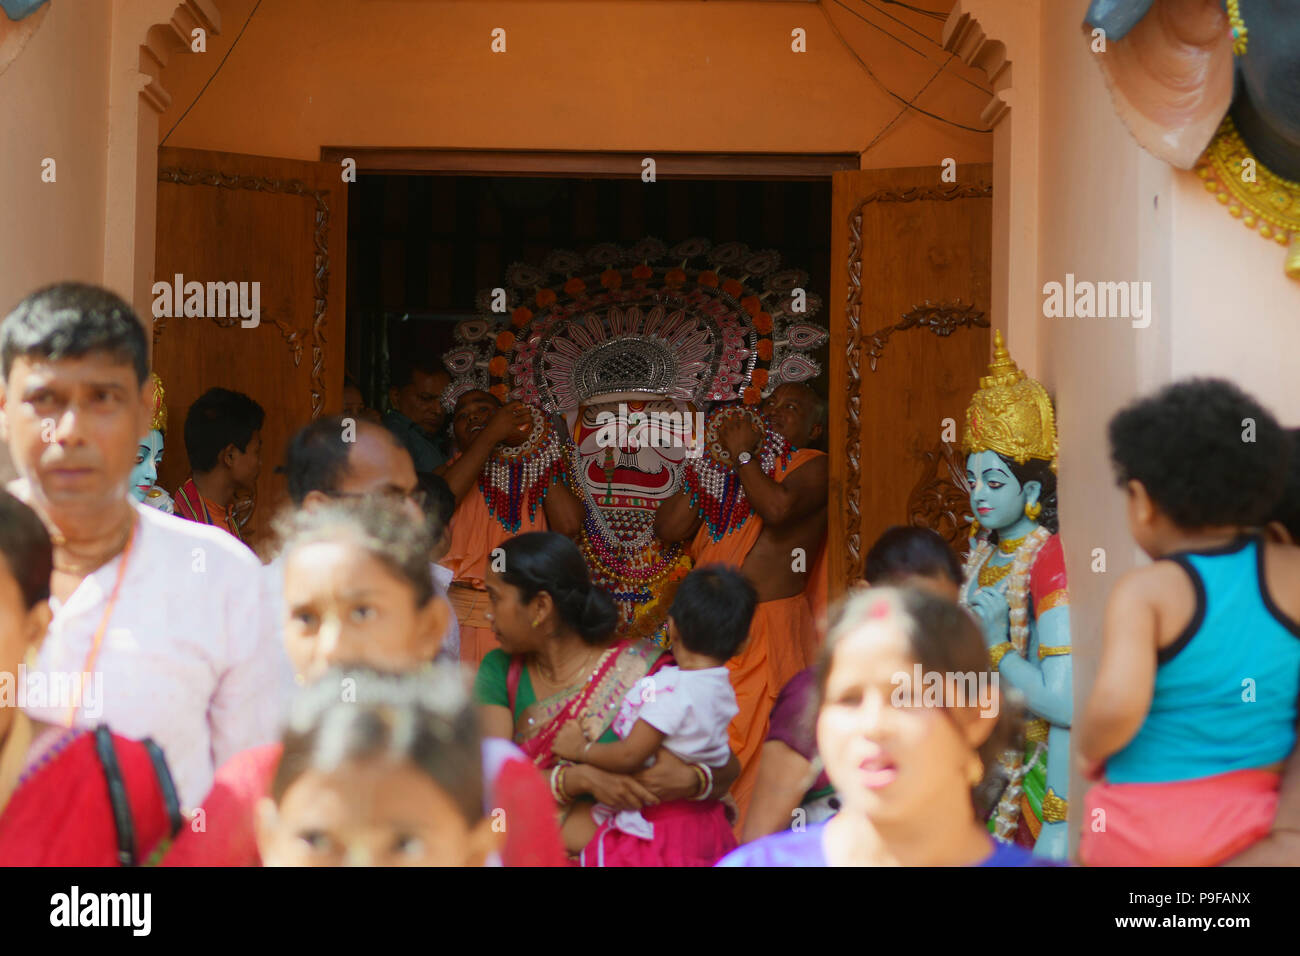 July 14, 2018 - Agartala, Tripura, India - Hindu priests seen carrying the idol out of the temple..Rath Yatra is an annual festival that involves devotees pulling a chariot of lord Jagannatha, his brother Balabhadra and sister Subhadra. (Credit Image: © Abhisek Saha/SOPA Images via ZUMA Wire) Stock Photo